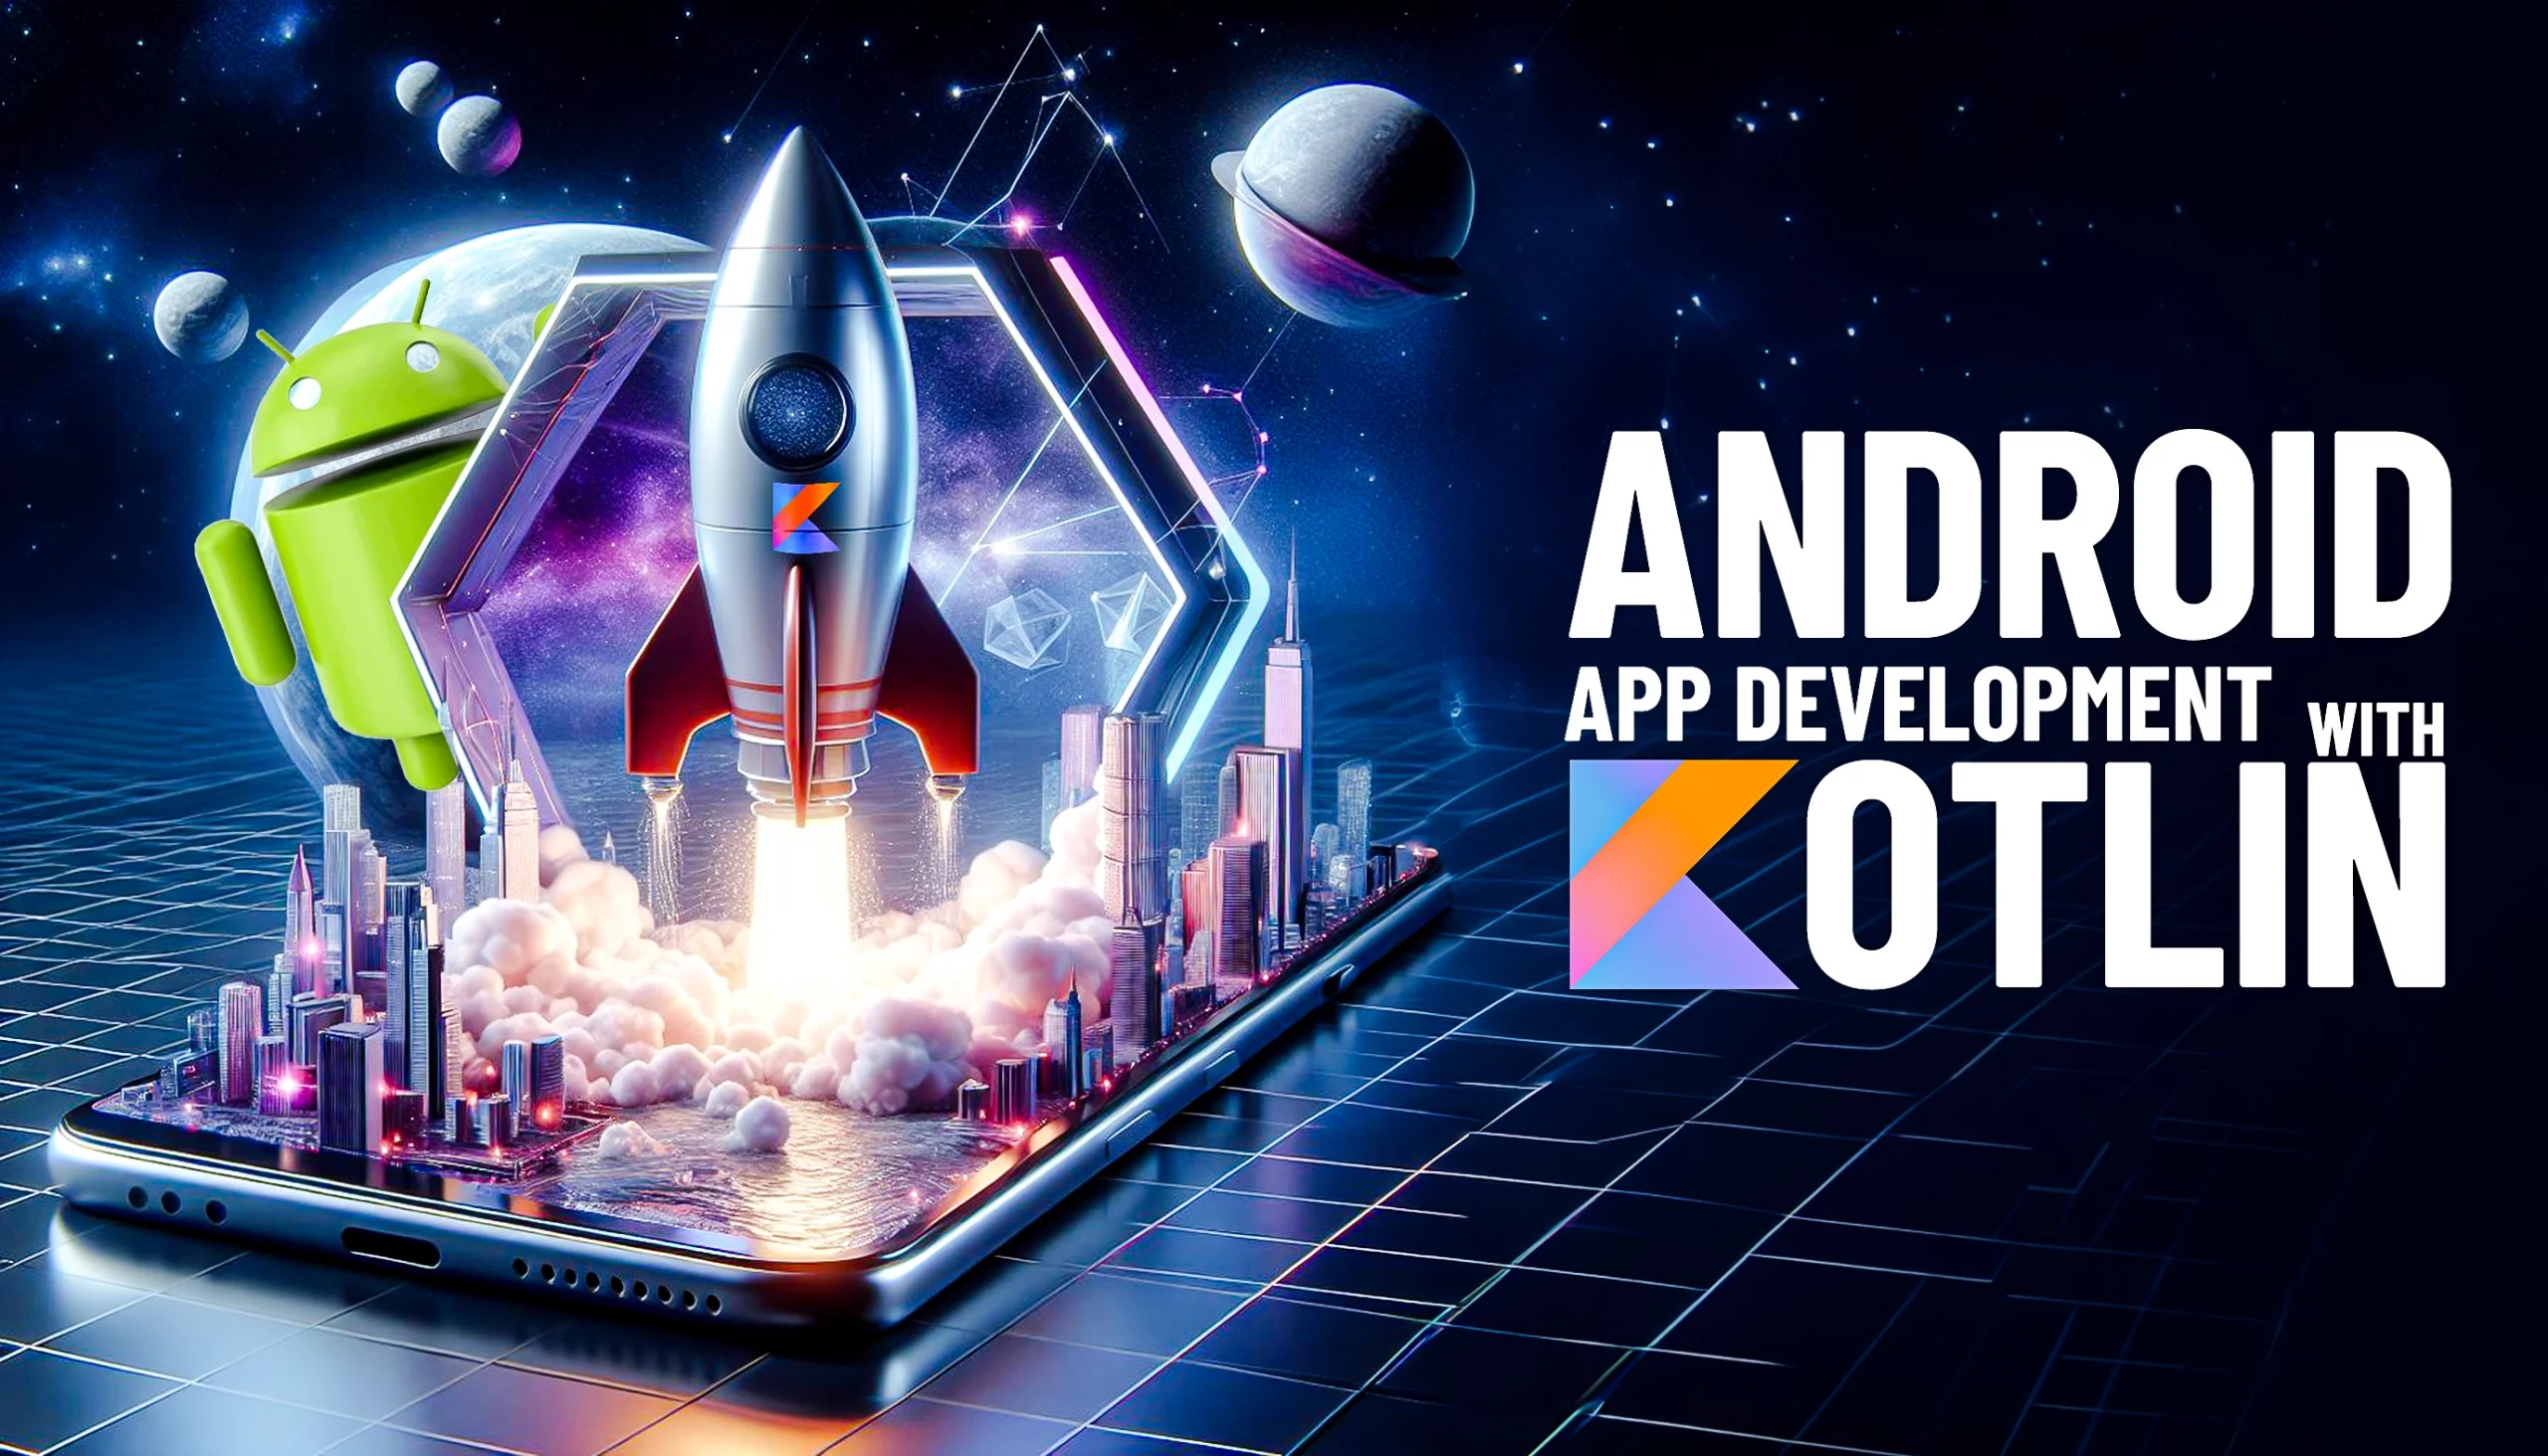 Android-App-Development-with-Kotlin-A-Looming-Demand